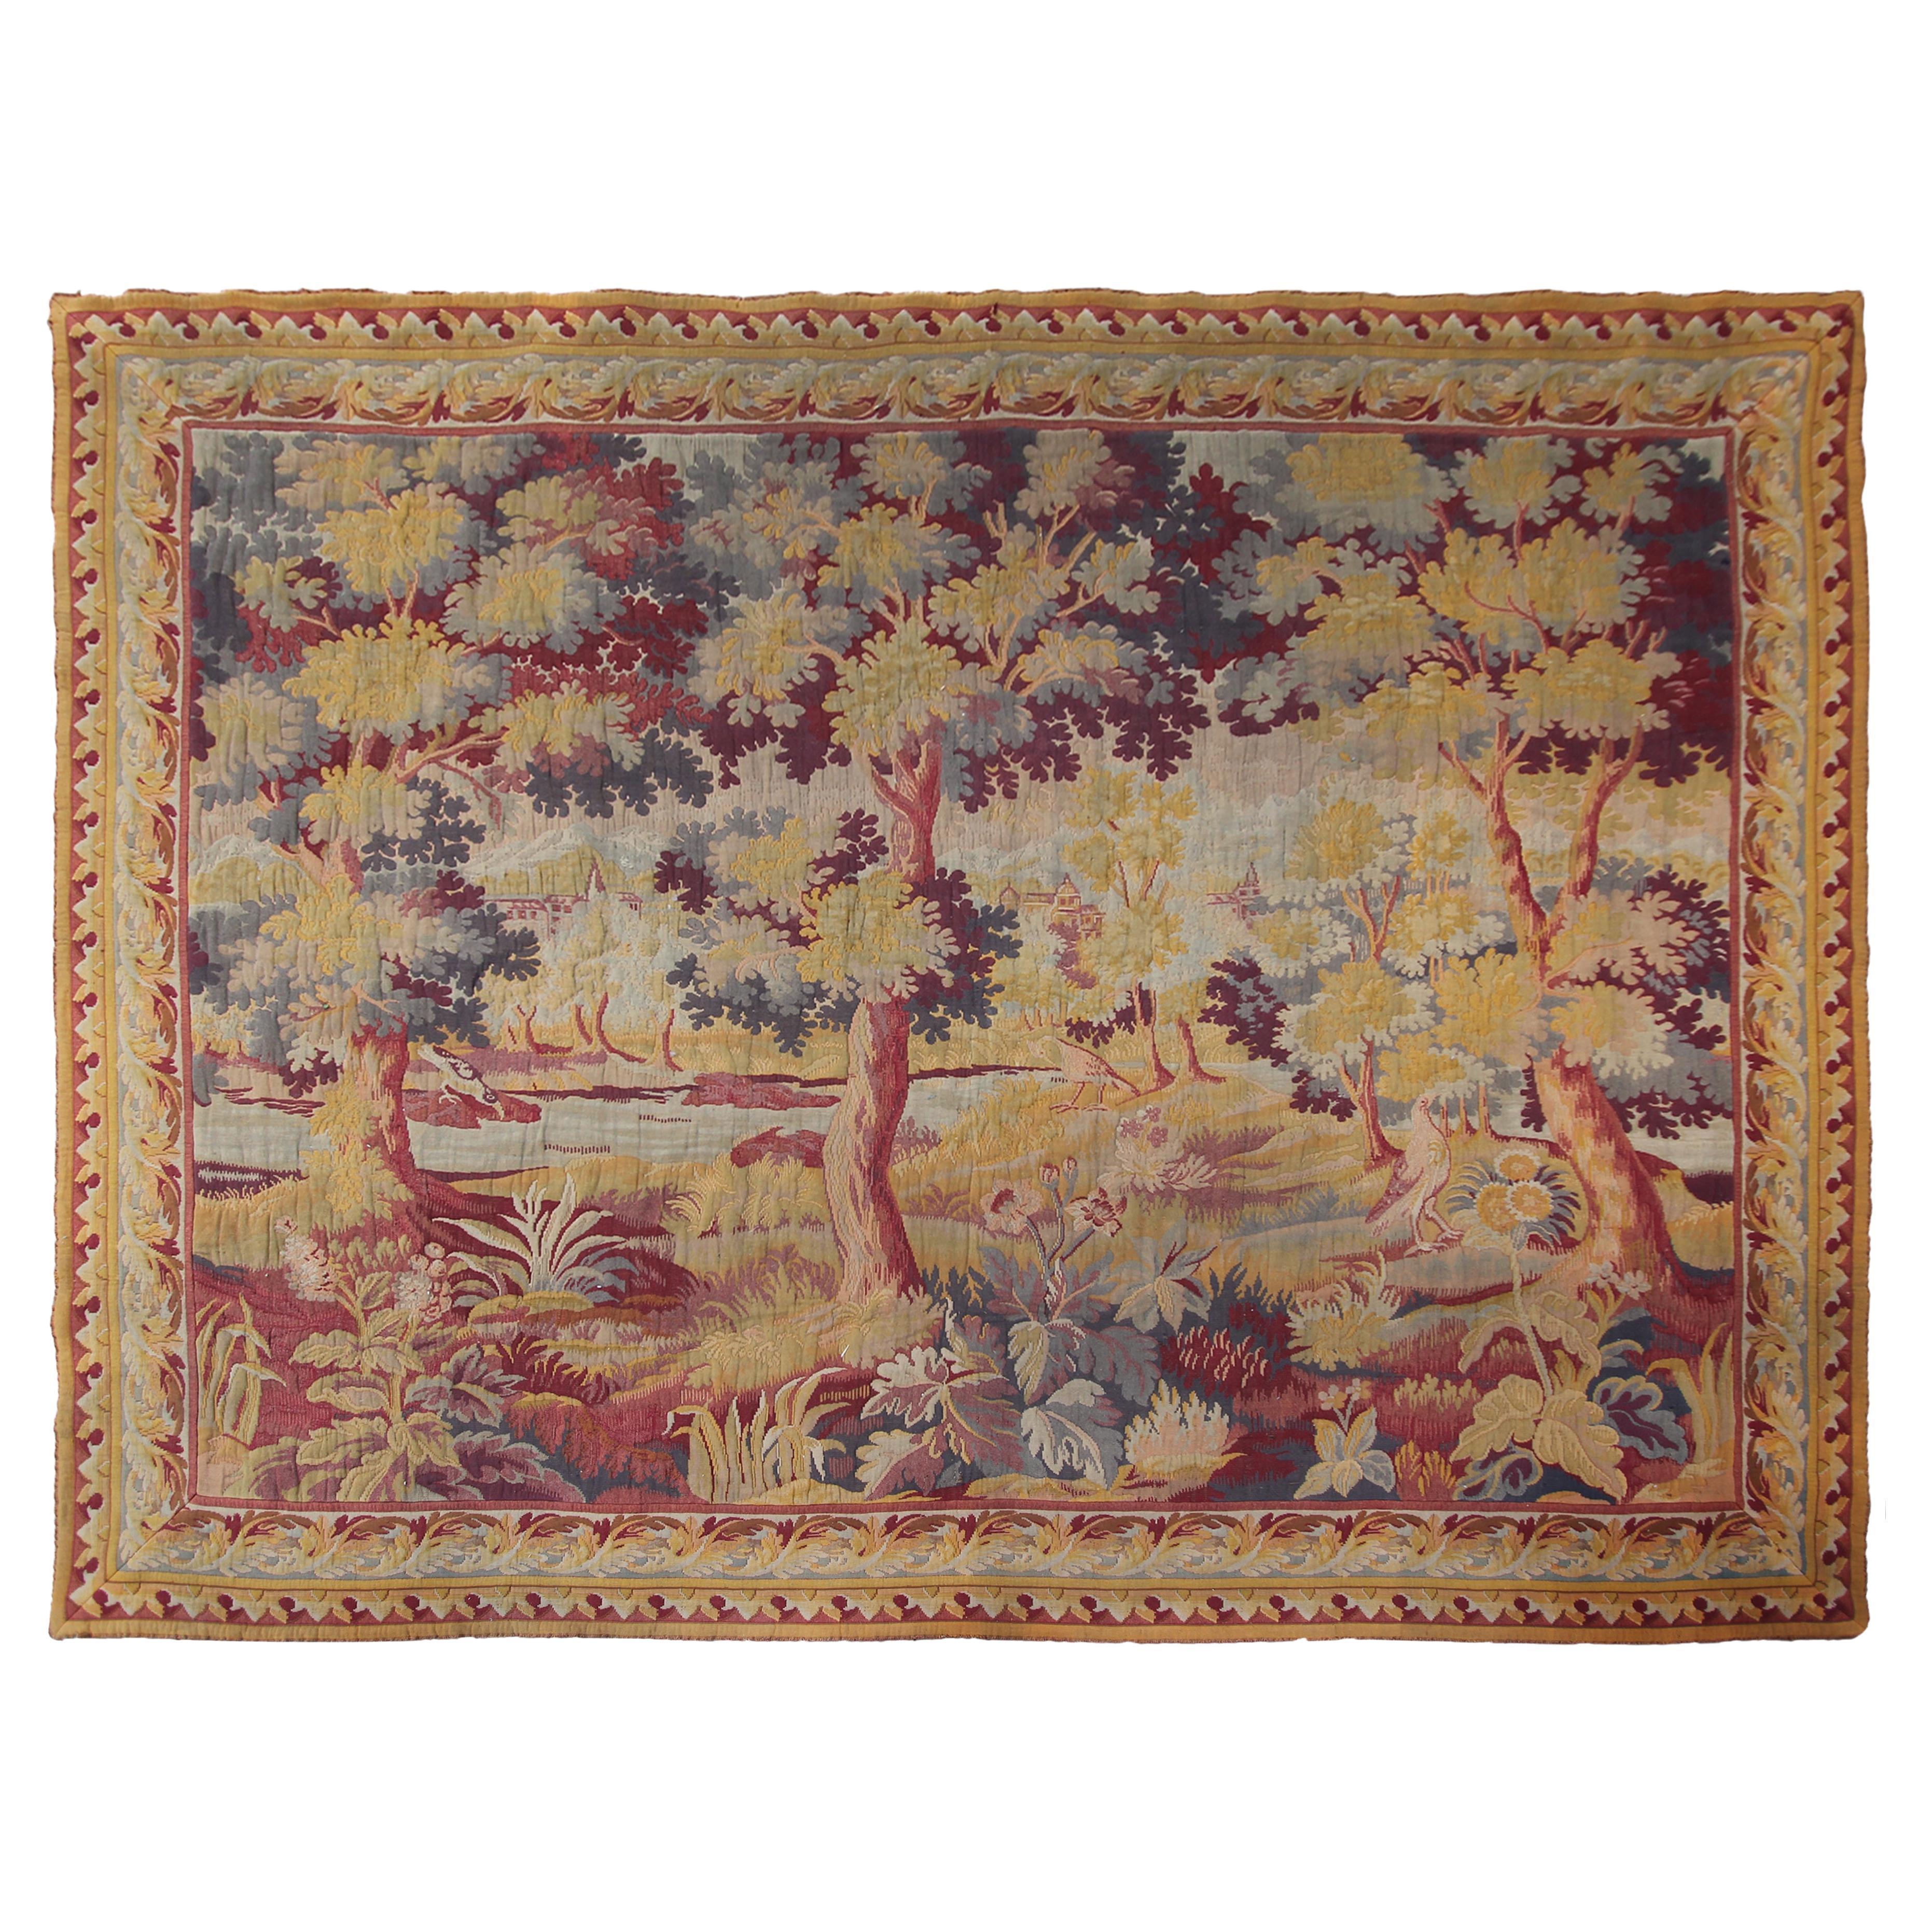 Large Antique French Aubusson Tapestry 274x335cm Verdure Tapestry 9x11 Oversize